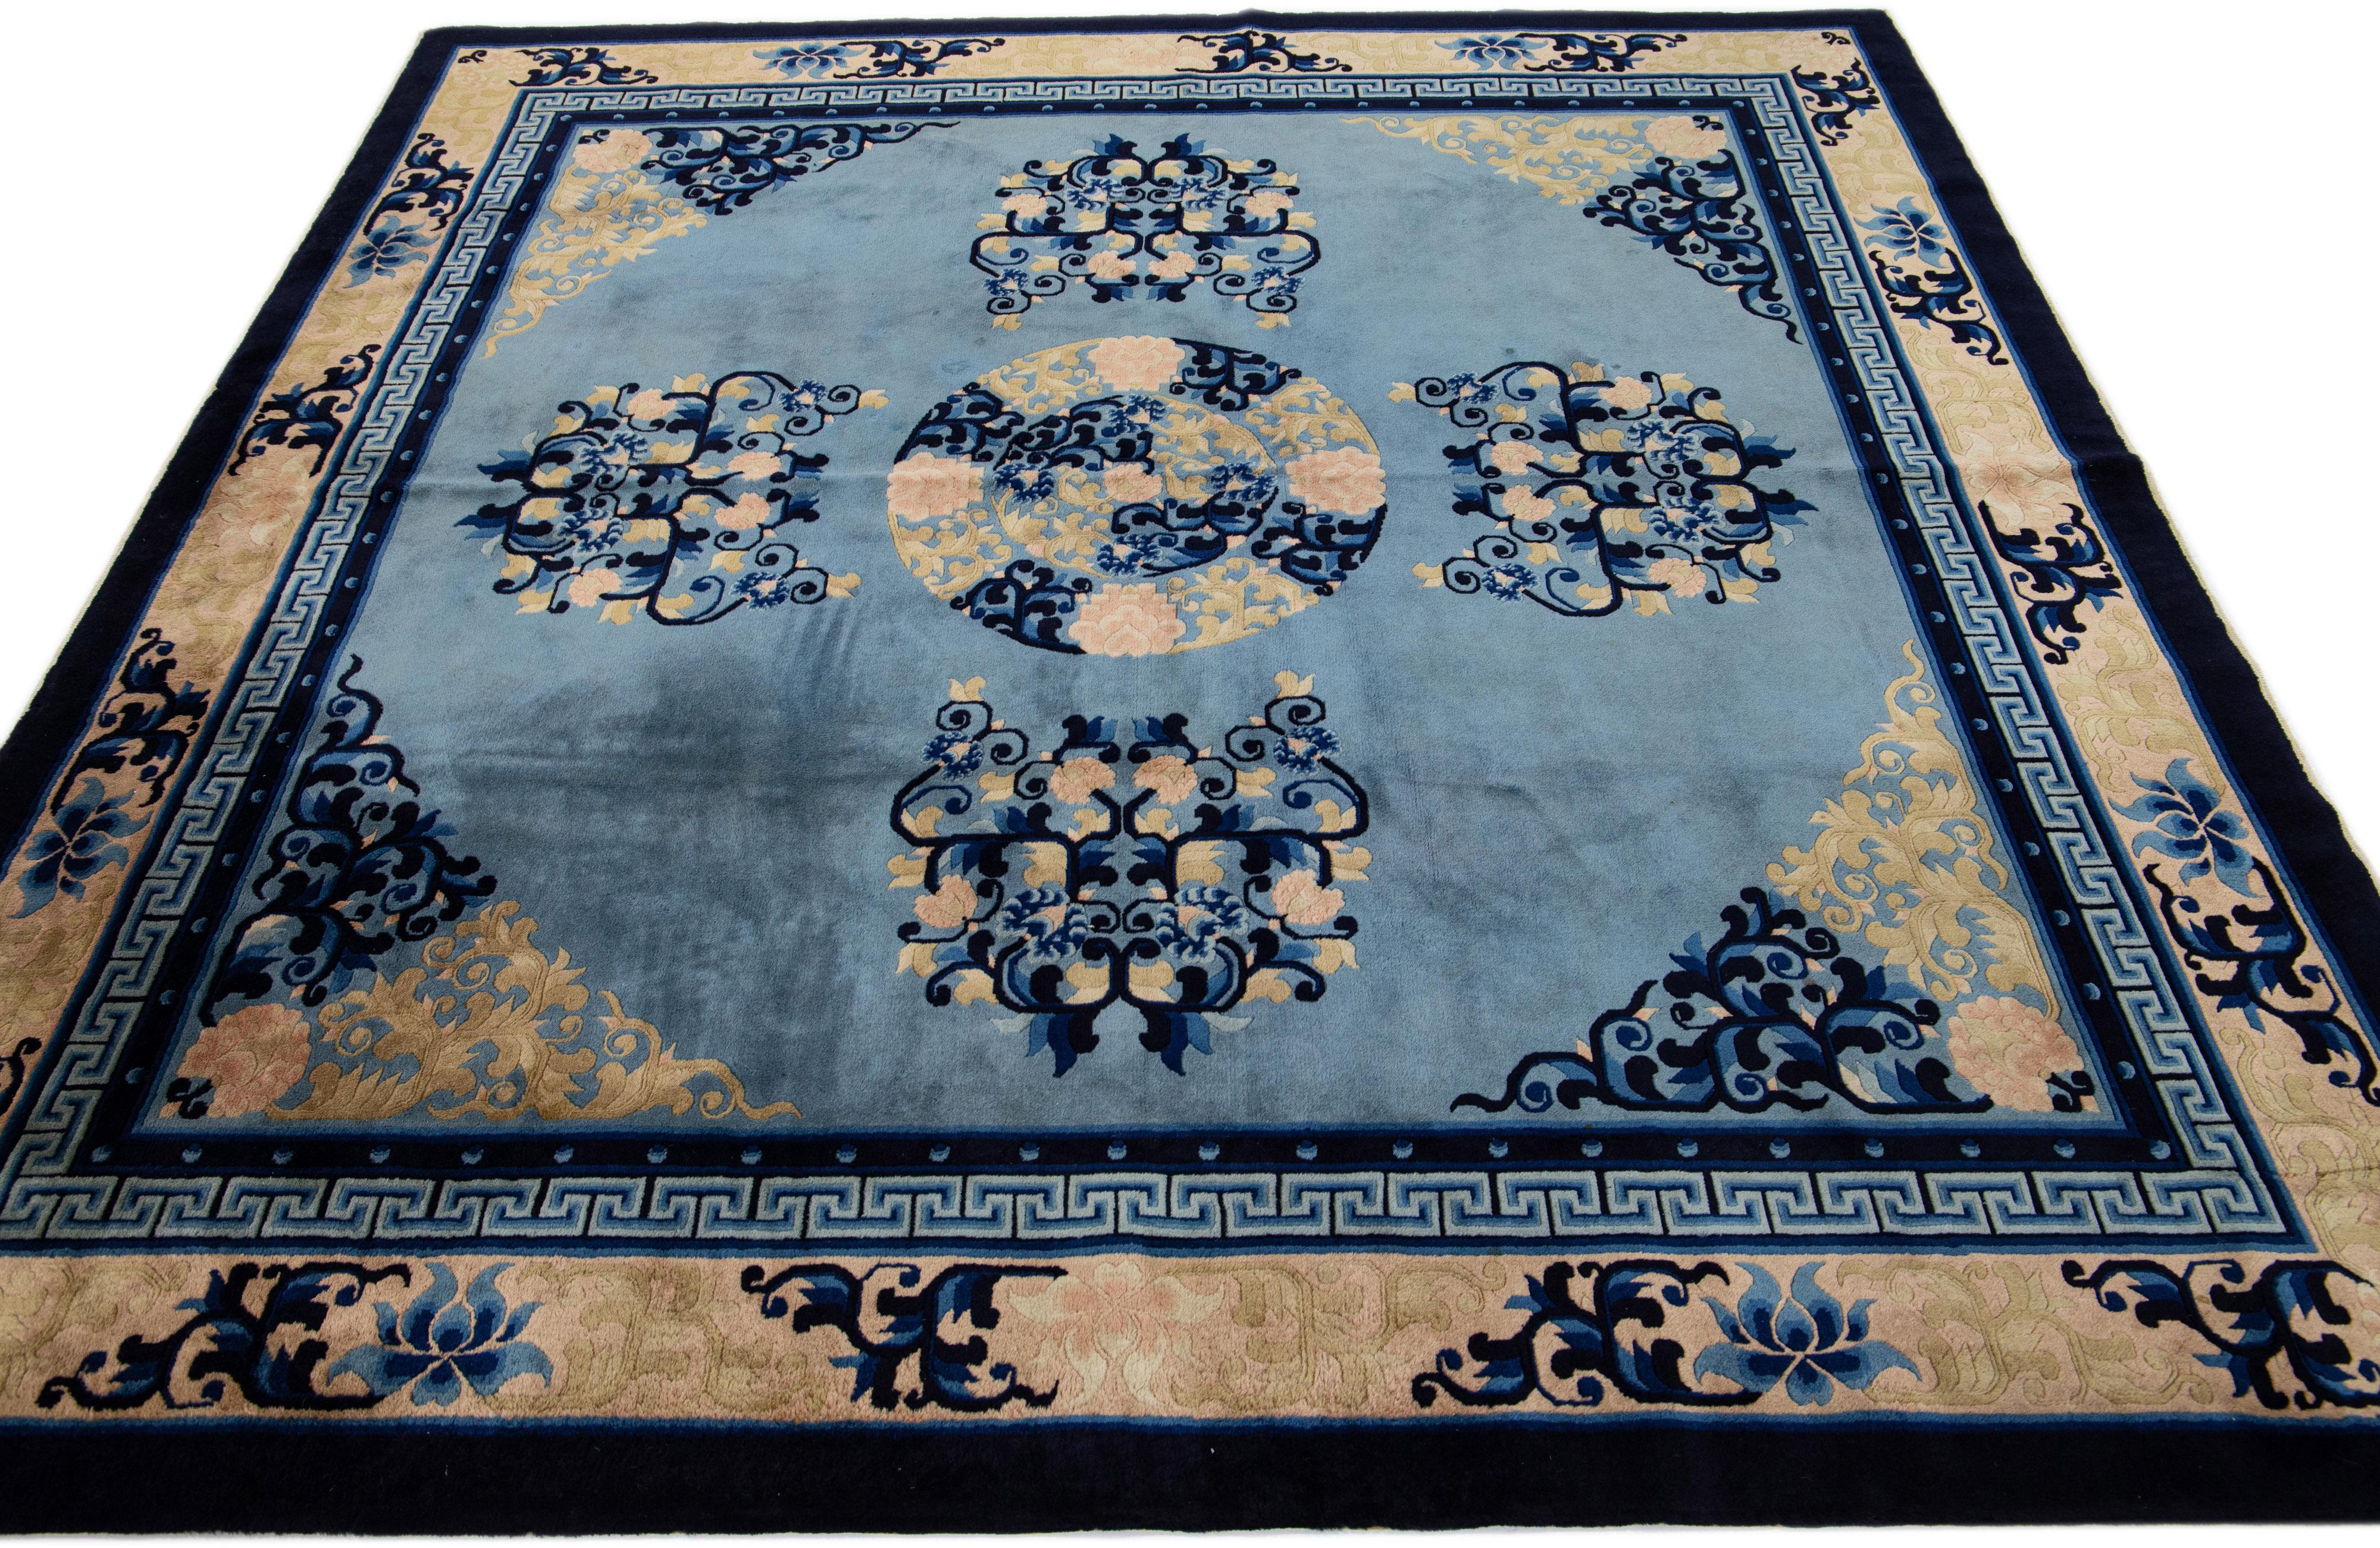 This luxurious Peking Chinese antique wool rug boasts a blue field decorated with a designed frame and golden, peach, and black accents in a beautiful all-over Chinese floral pattern.

This rug measures: 7'2